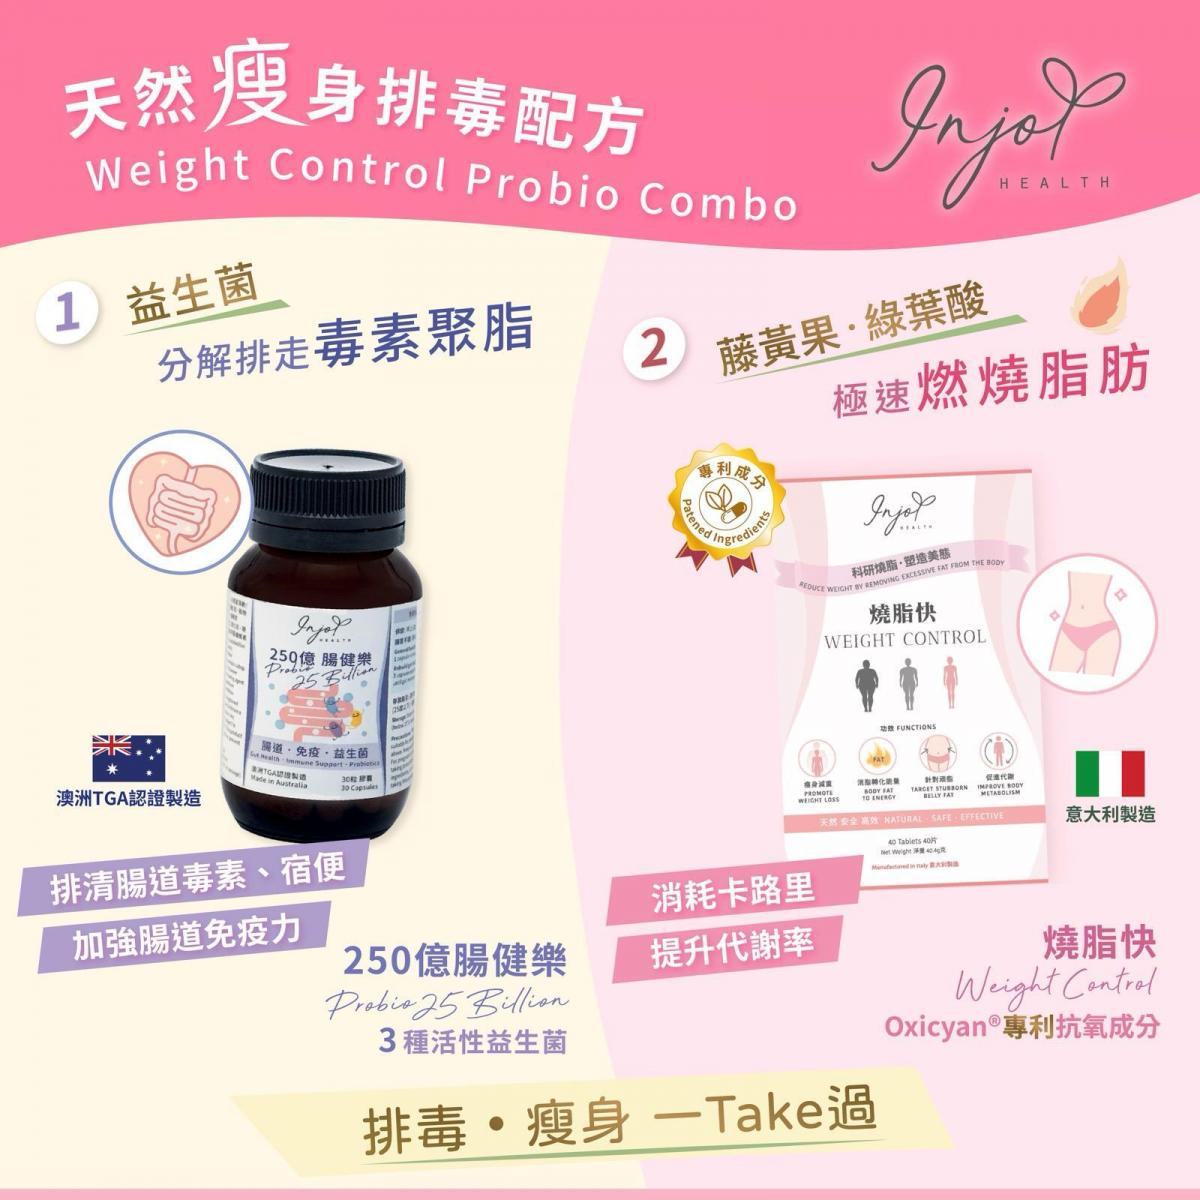 Weight Control Probio Combo